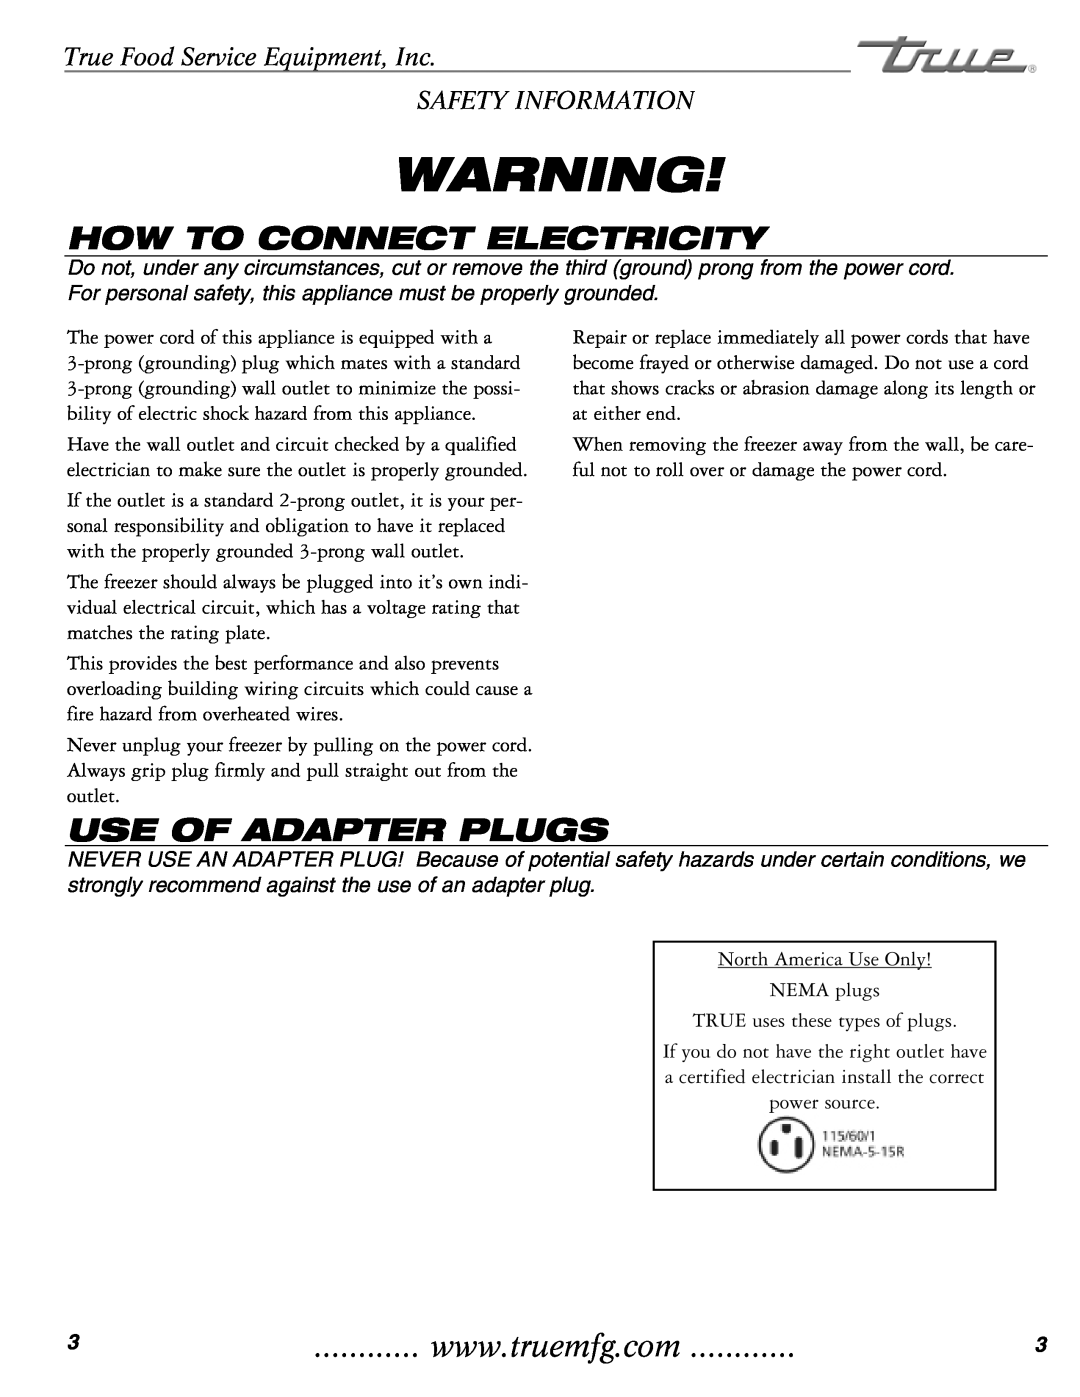 True Manufacturing Company THF-41FL installation manual How To Connect Electricity, Use Of Adapter Plugs 